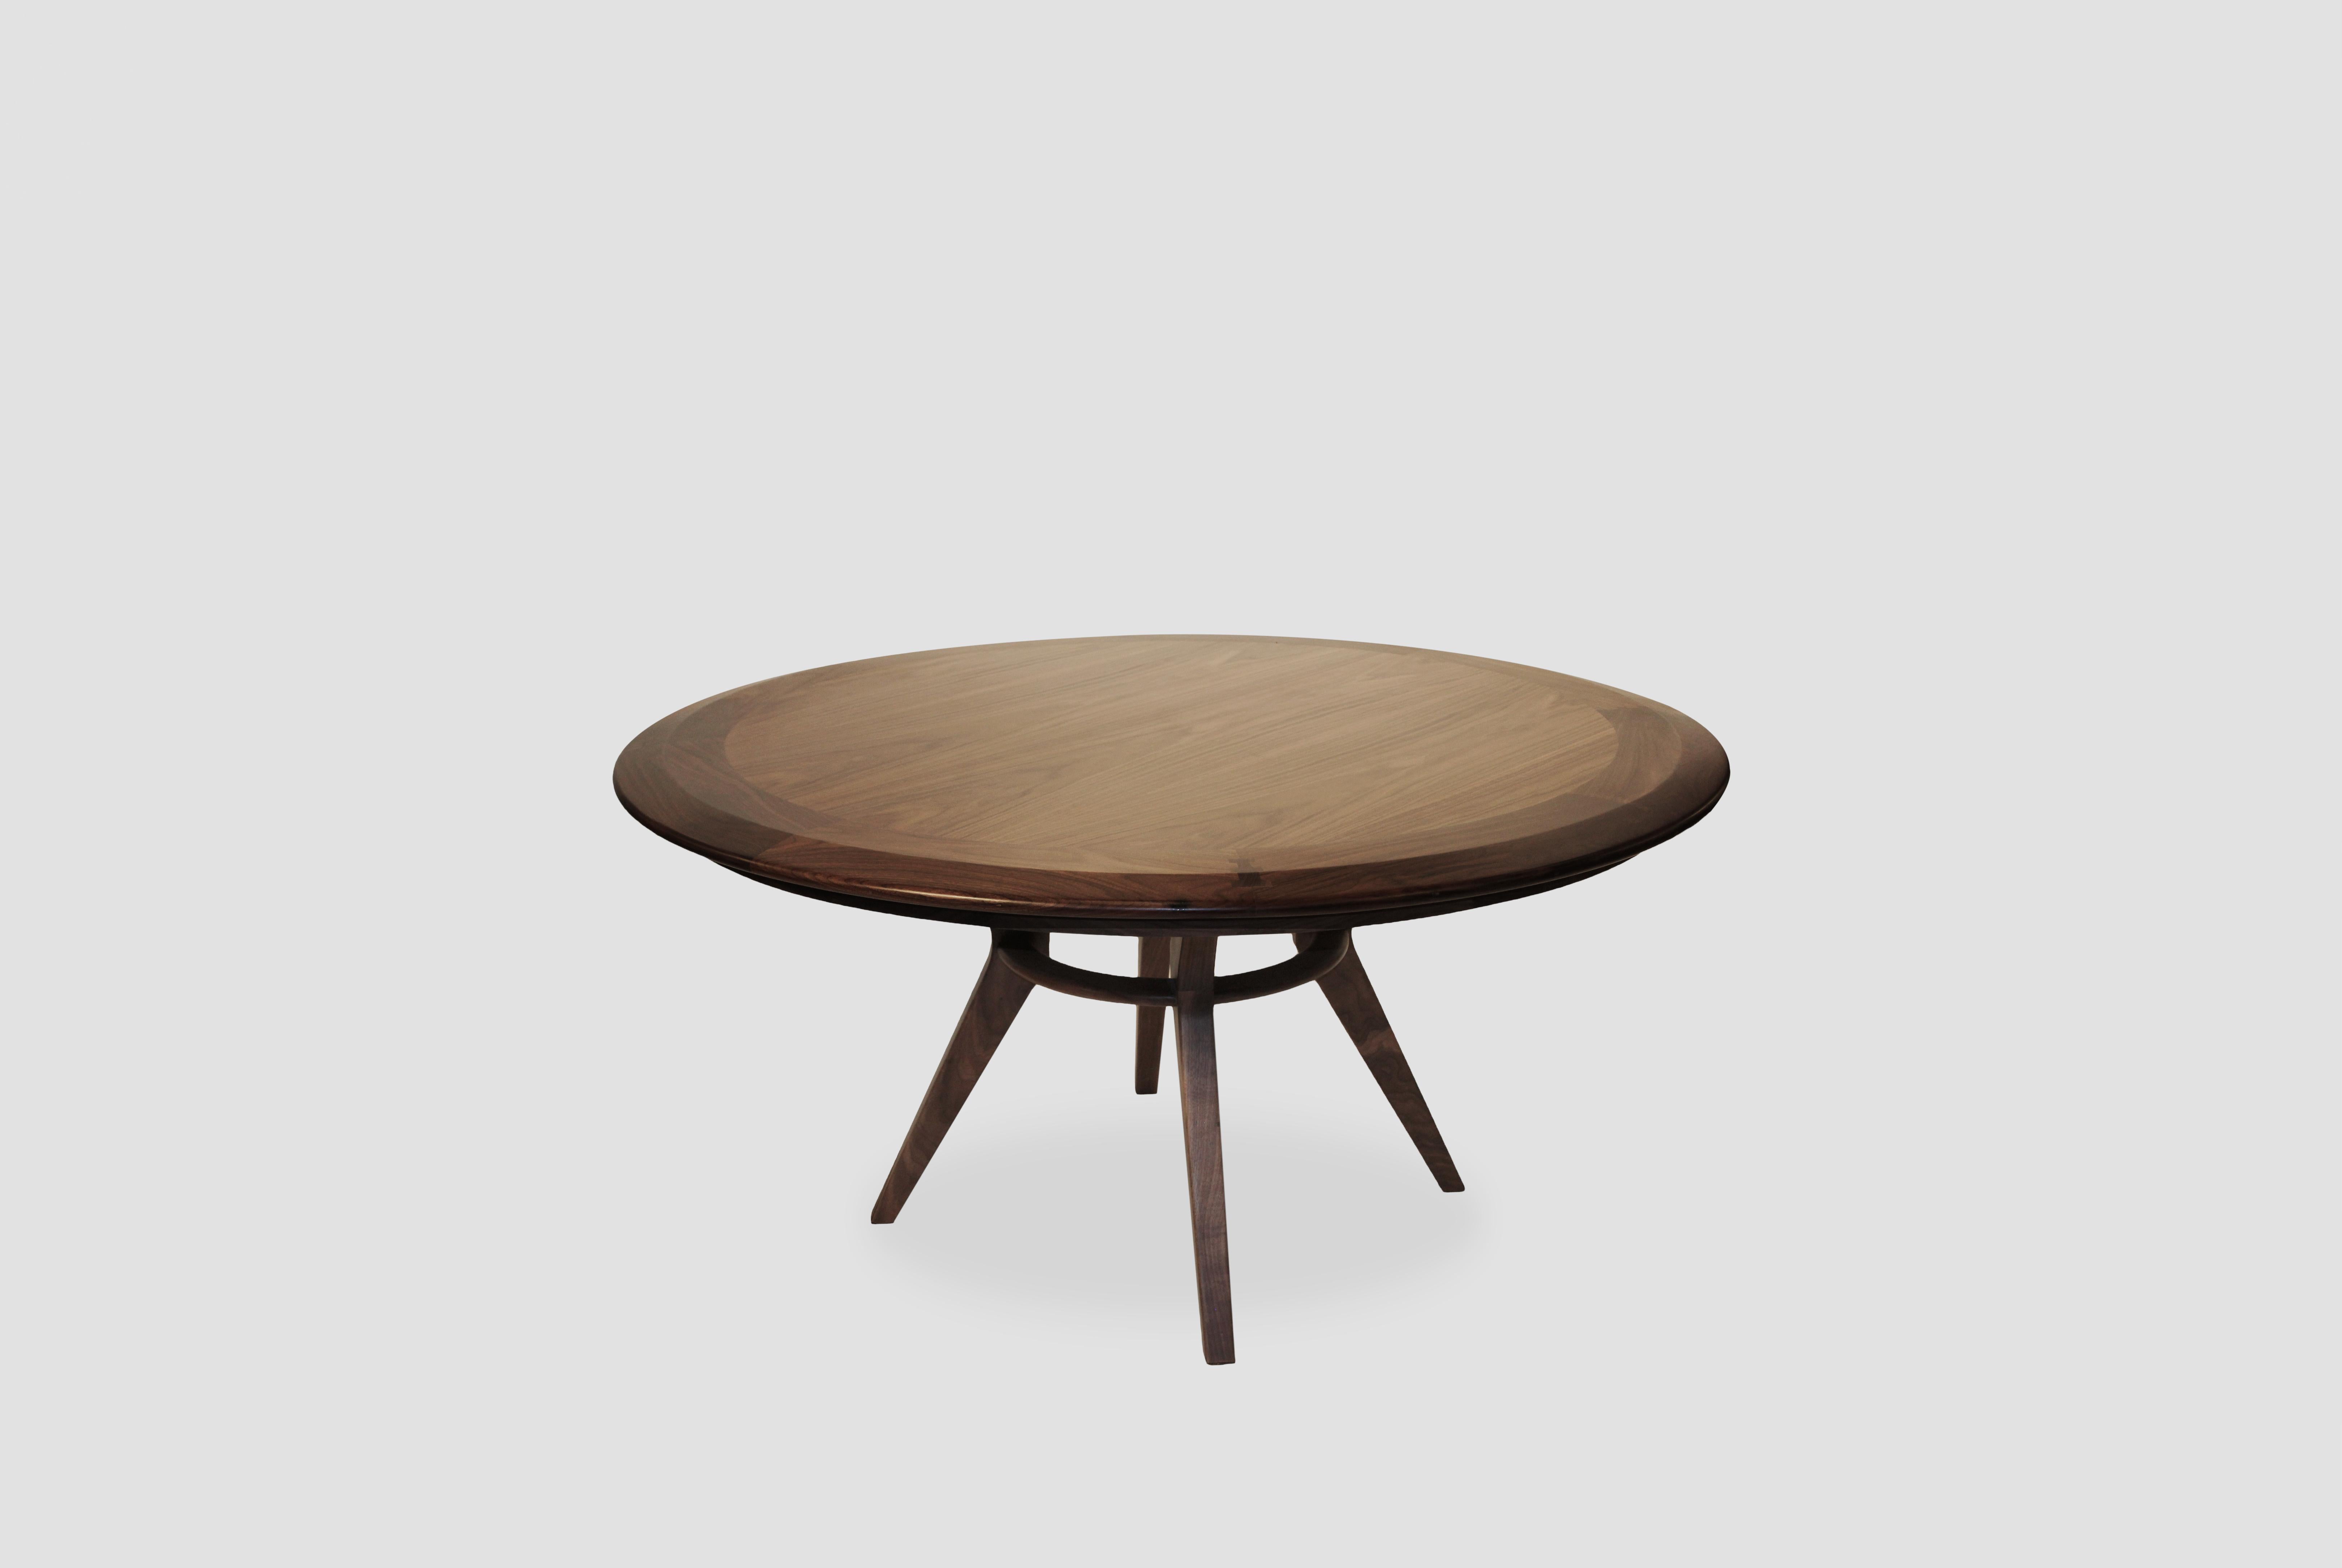 Round boomerang dining table by Arturo Verástegui
Dimensions: D 150 x H 75 cm
Materials: walnut wood.

Round dining table made of walnut.

Arturo Verástegui has been the director and founder of BREUER since 2015. Arturo began his career in the